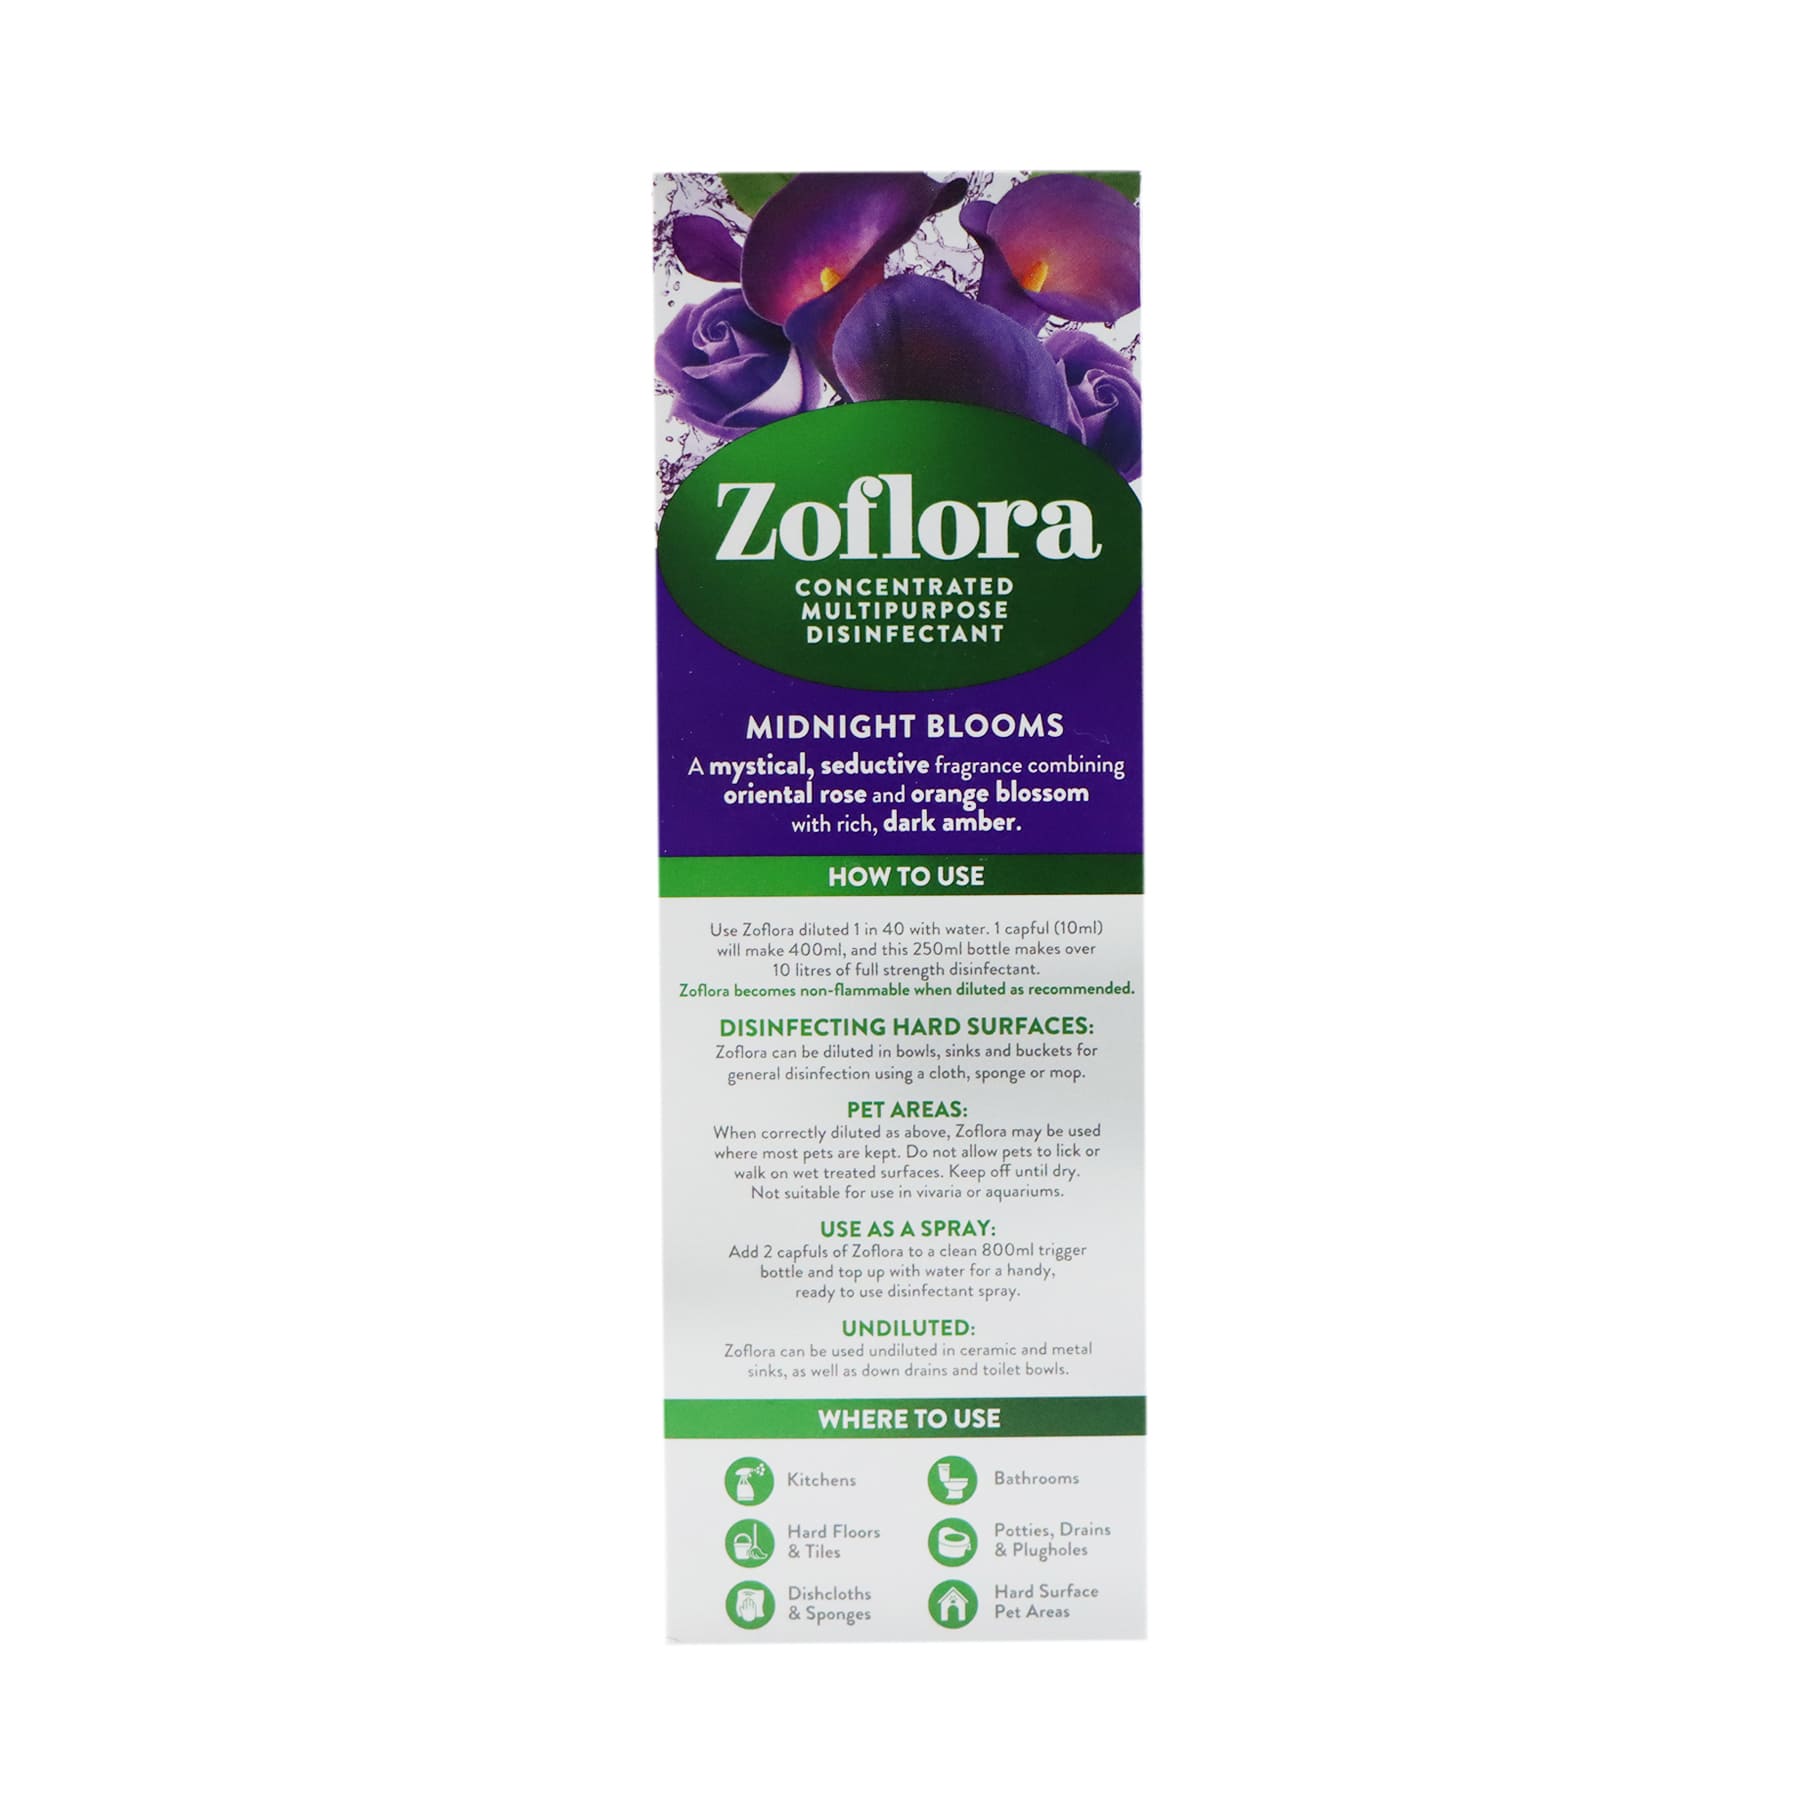 Zoflora Concentrated Disinfectant 250ml (Midnight Blooms)